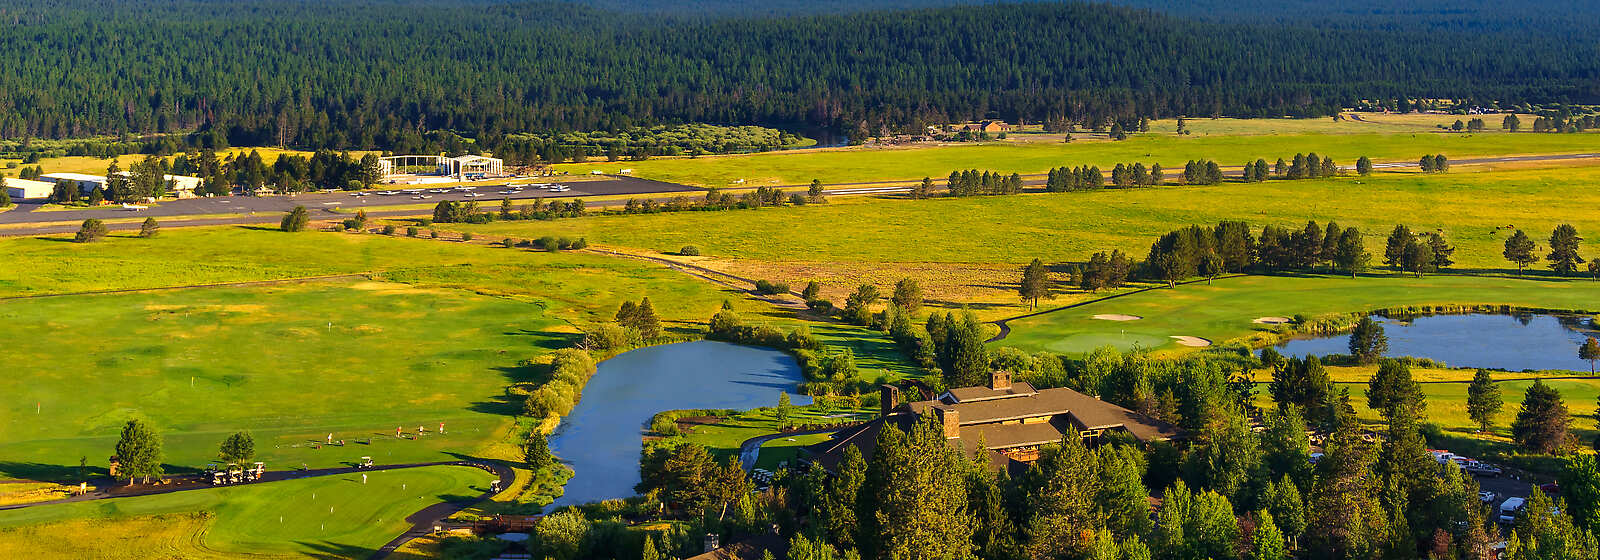 Sunriver Resort The Hotel Collection Amex Travel